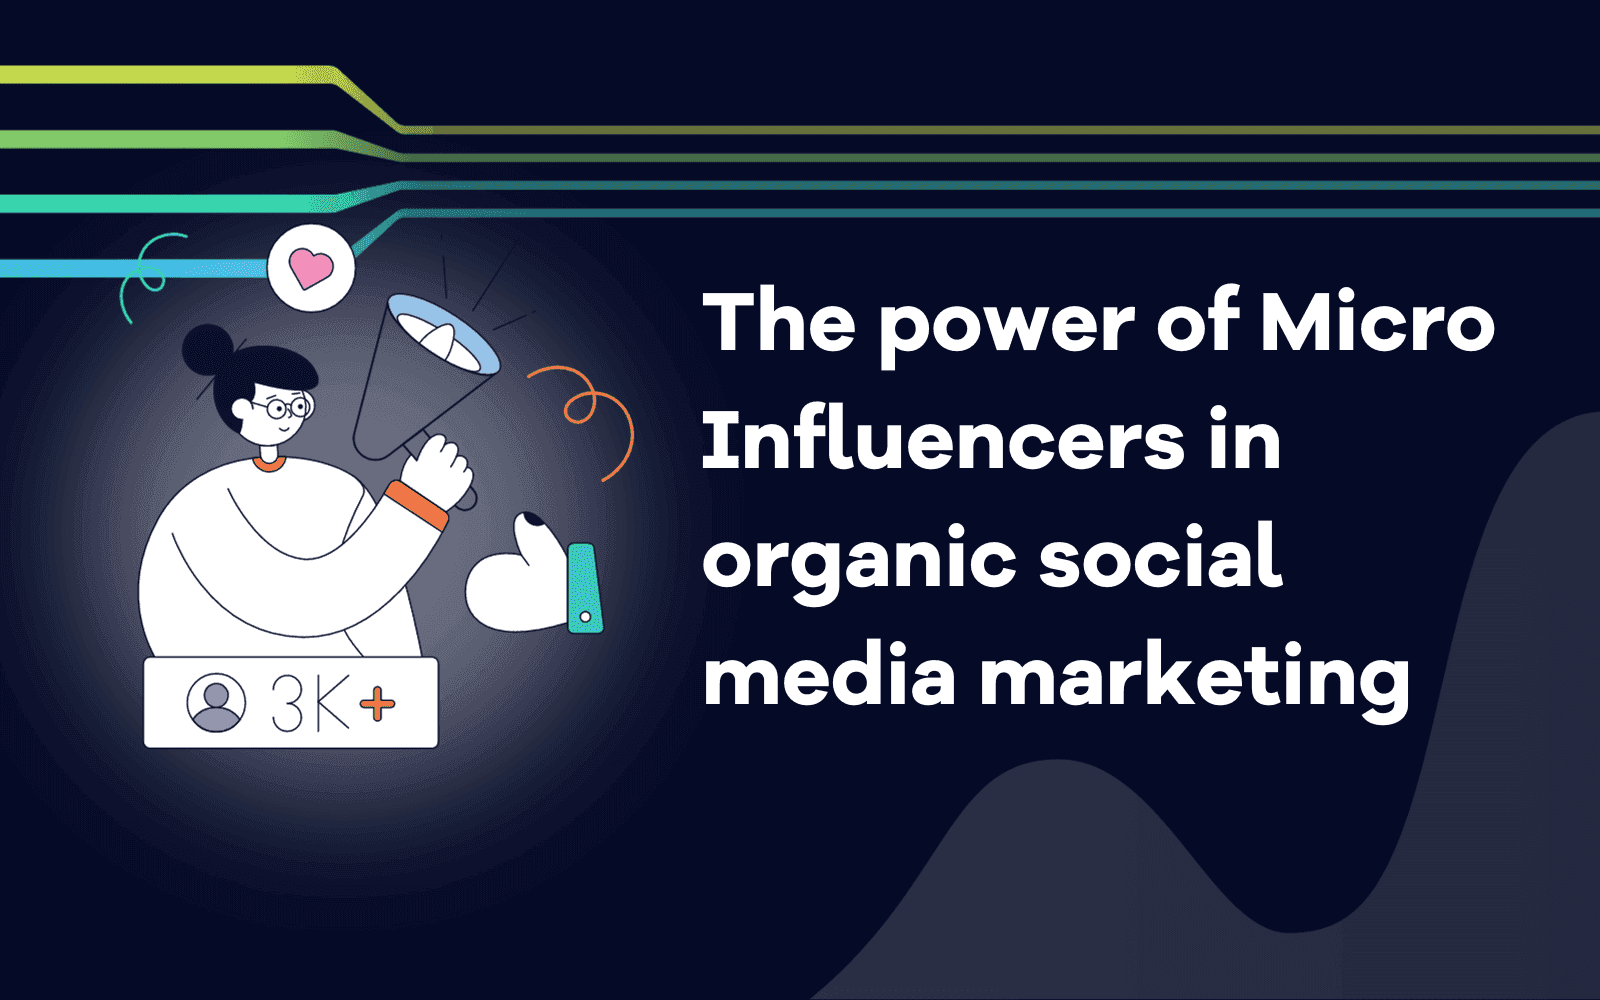 The power of Micro Influencers in organic social media marketing